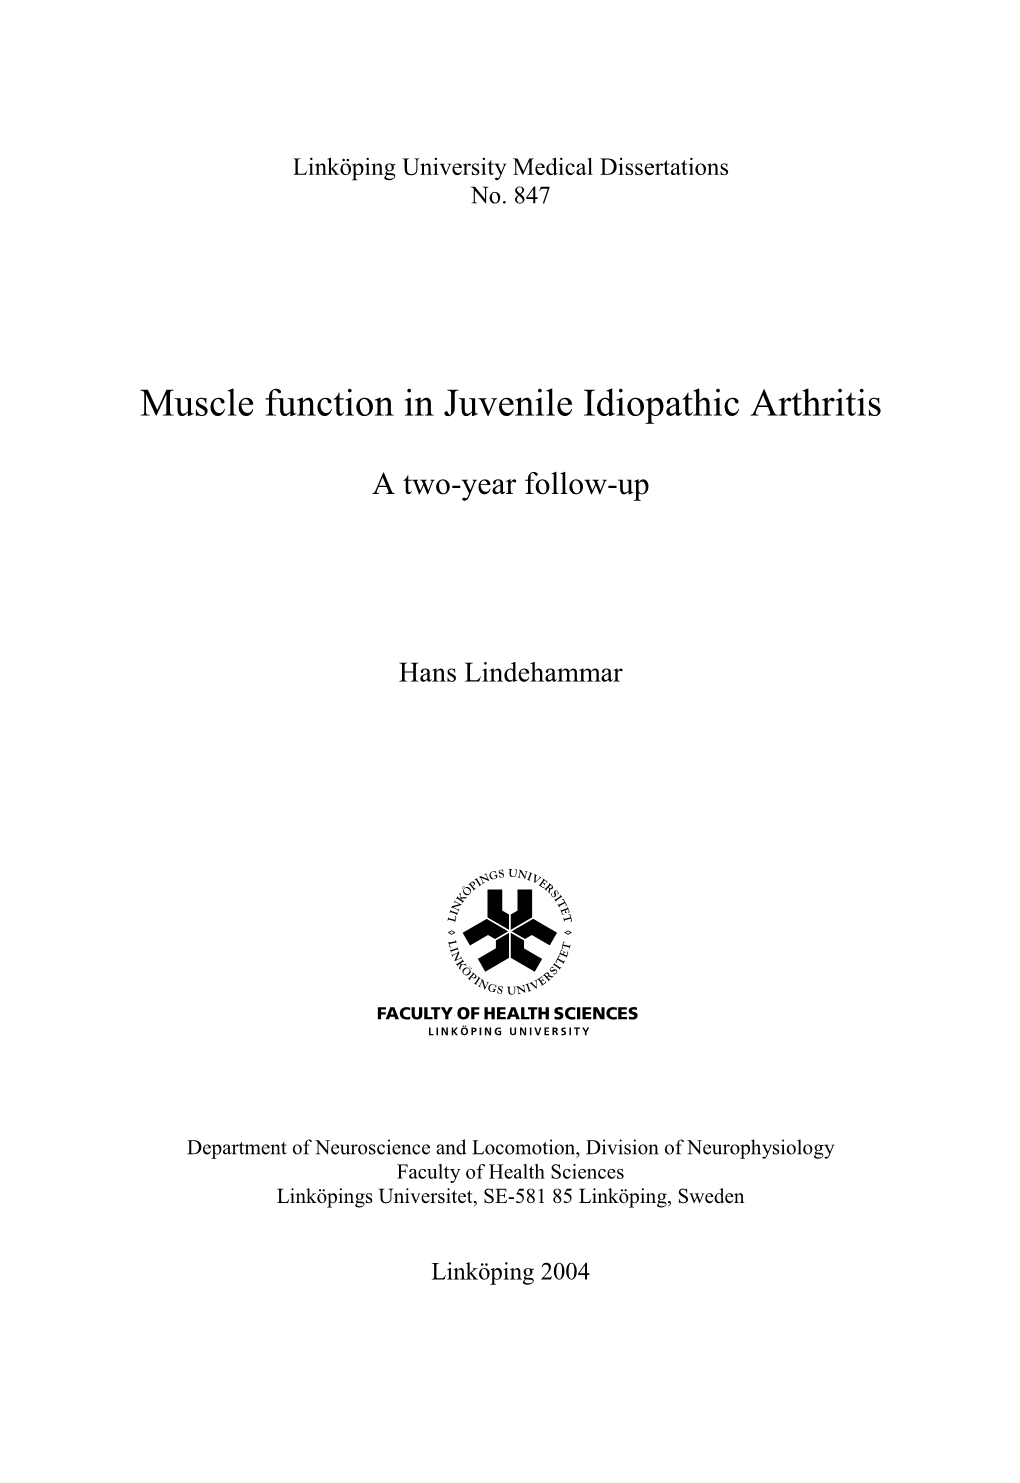 Muscle Function in Juvenile Idiopathic Arthritis